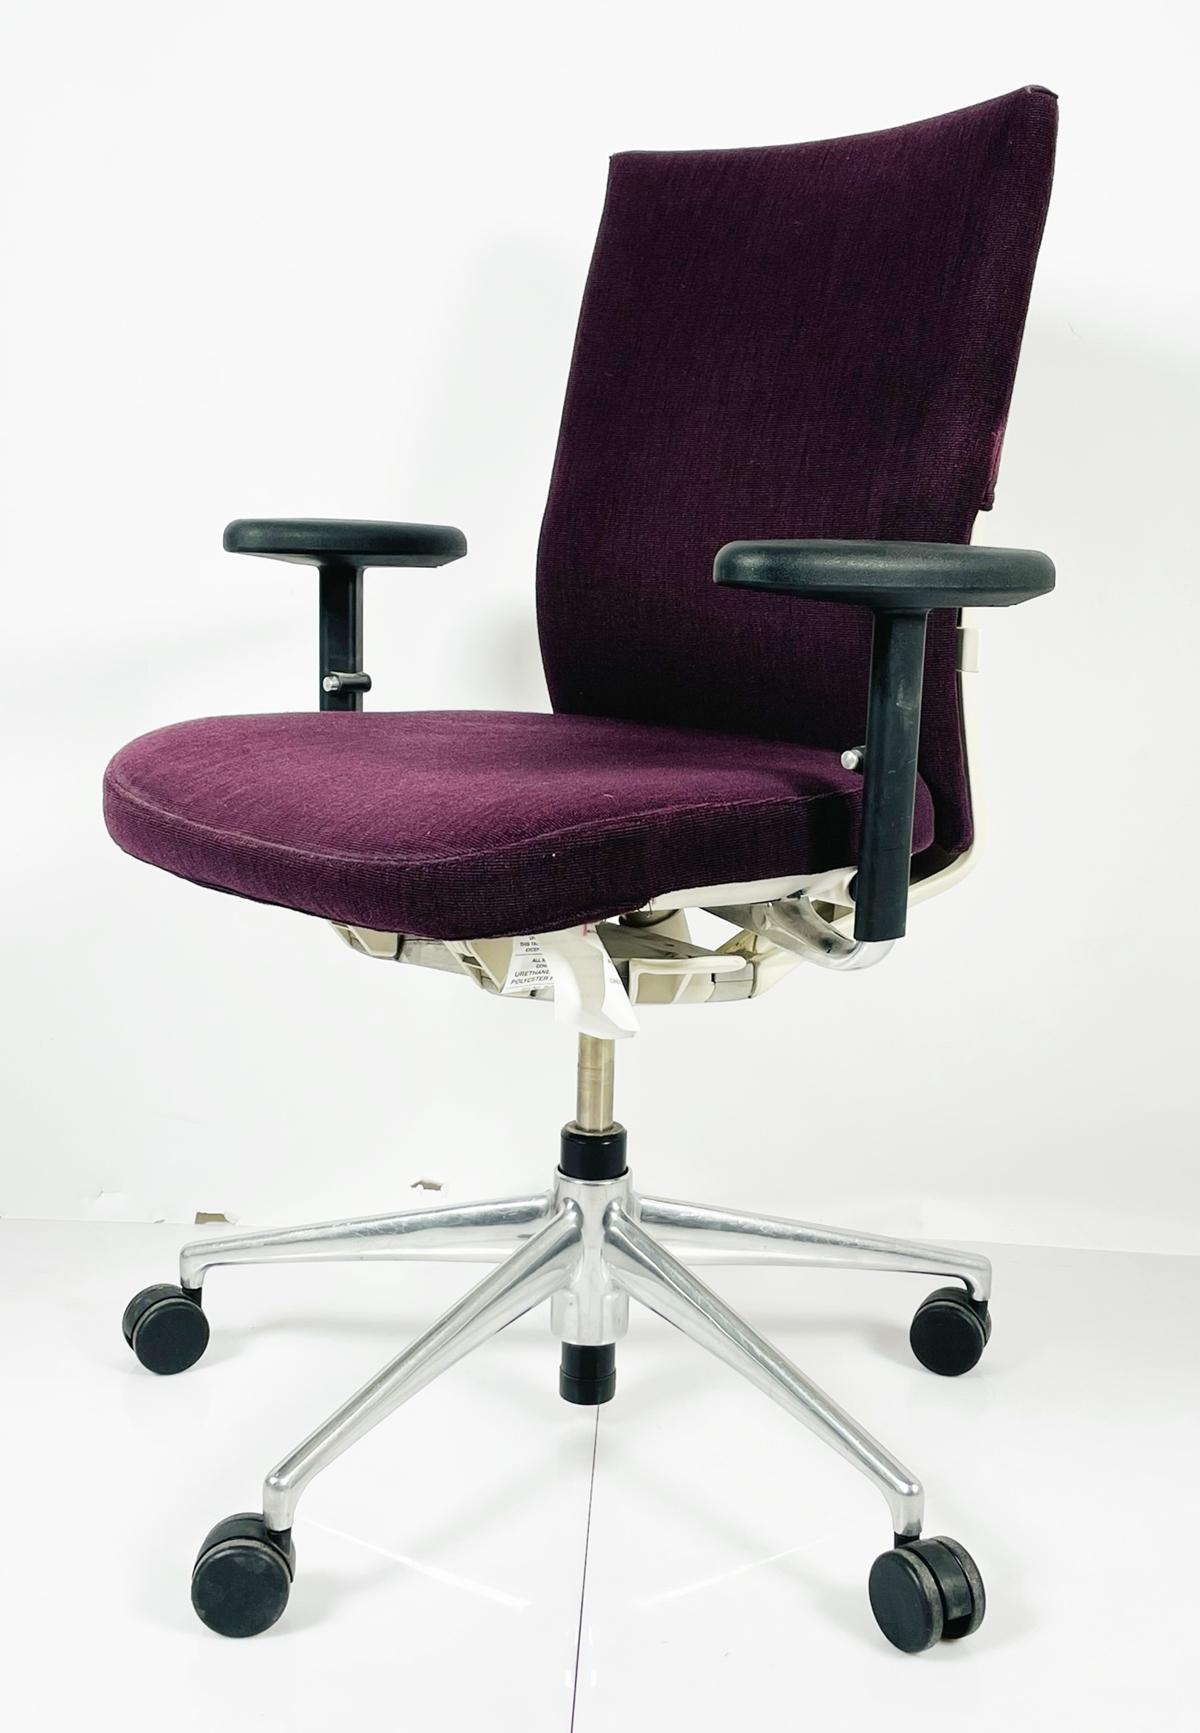 Office/desk chair designed by Antonio Citterio and manufactured by Vitra and part of the Axess collection.

The chair is height adjustable, the back tilts back and the armrests also move up and down, the chair is very comfortable.

The chair has